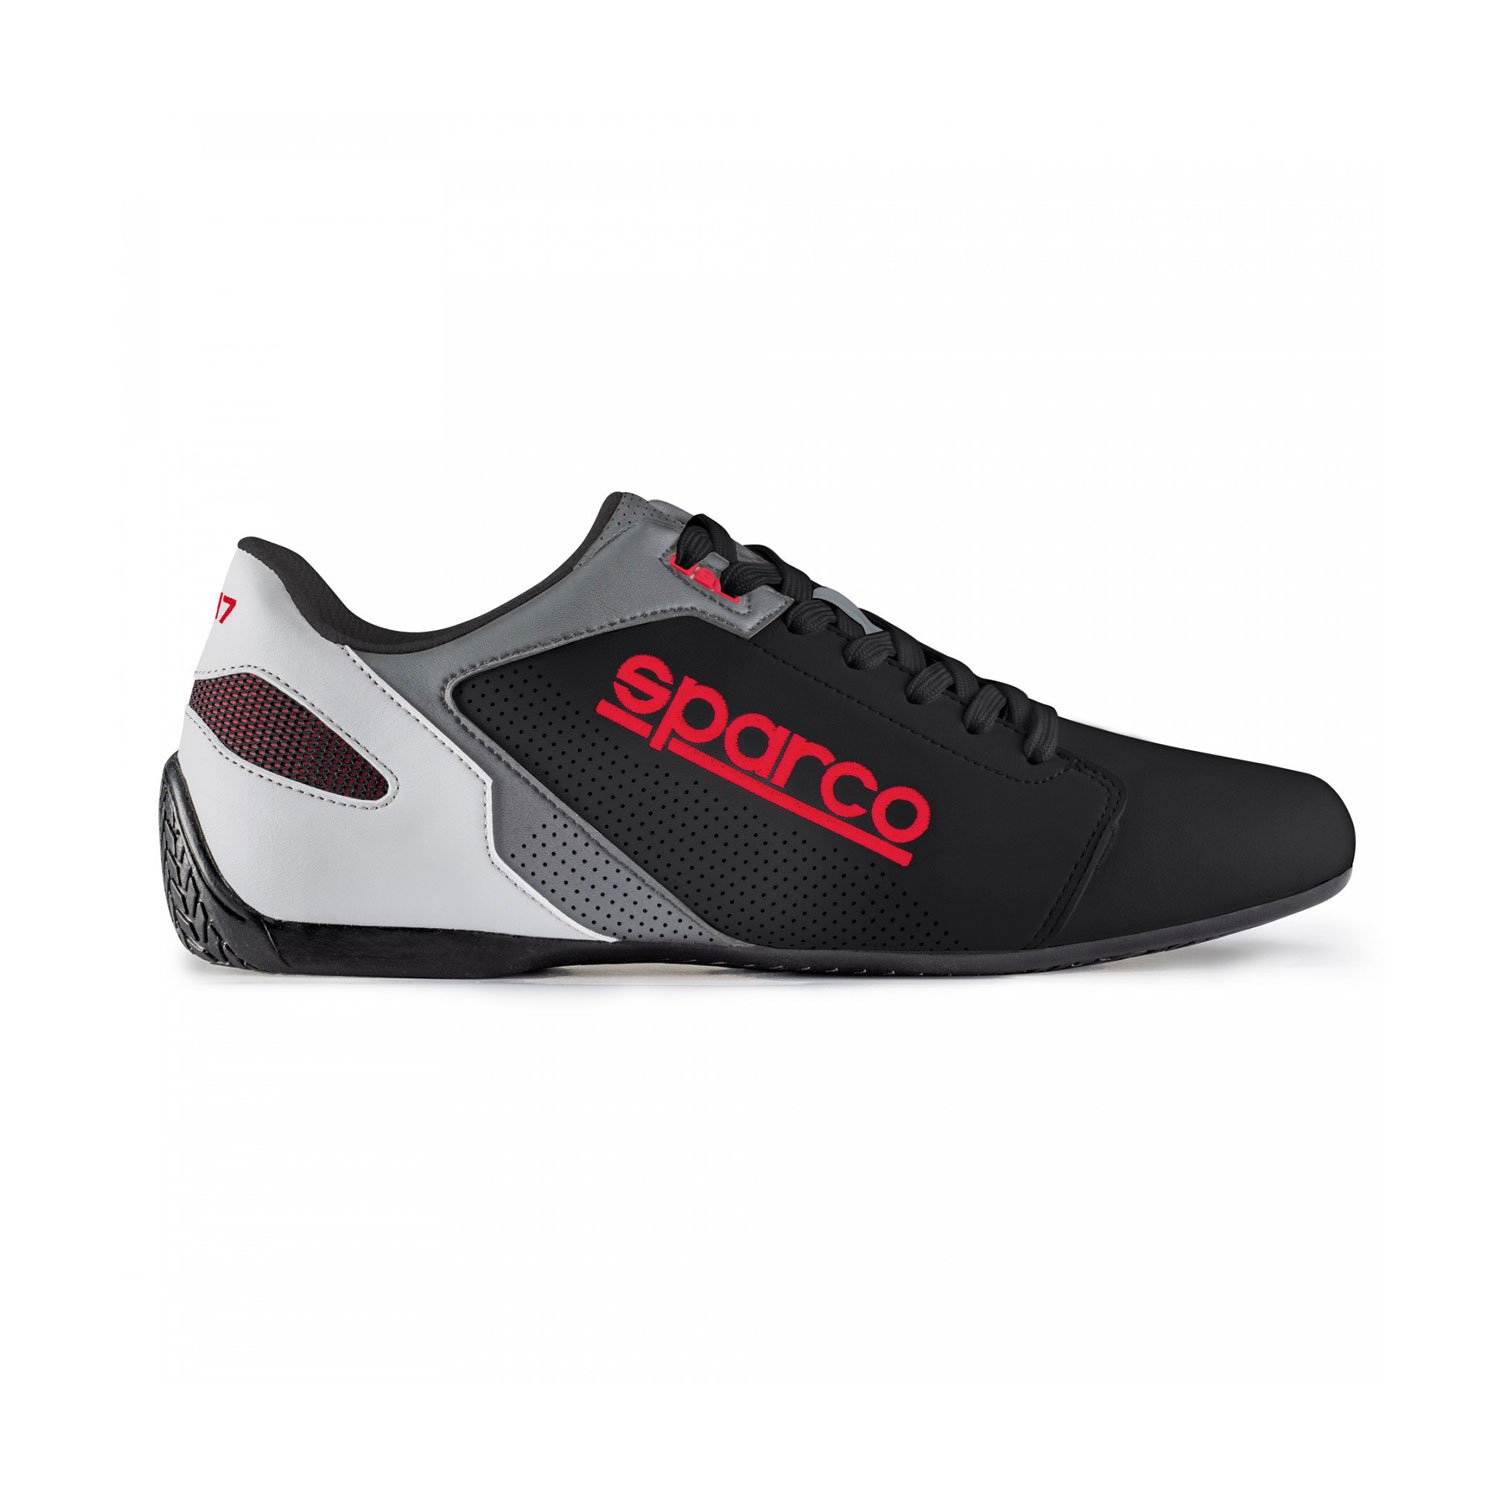 Sparco Italy SL-17 Casual Shoes - Black 